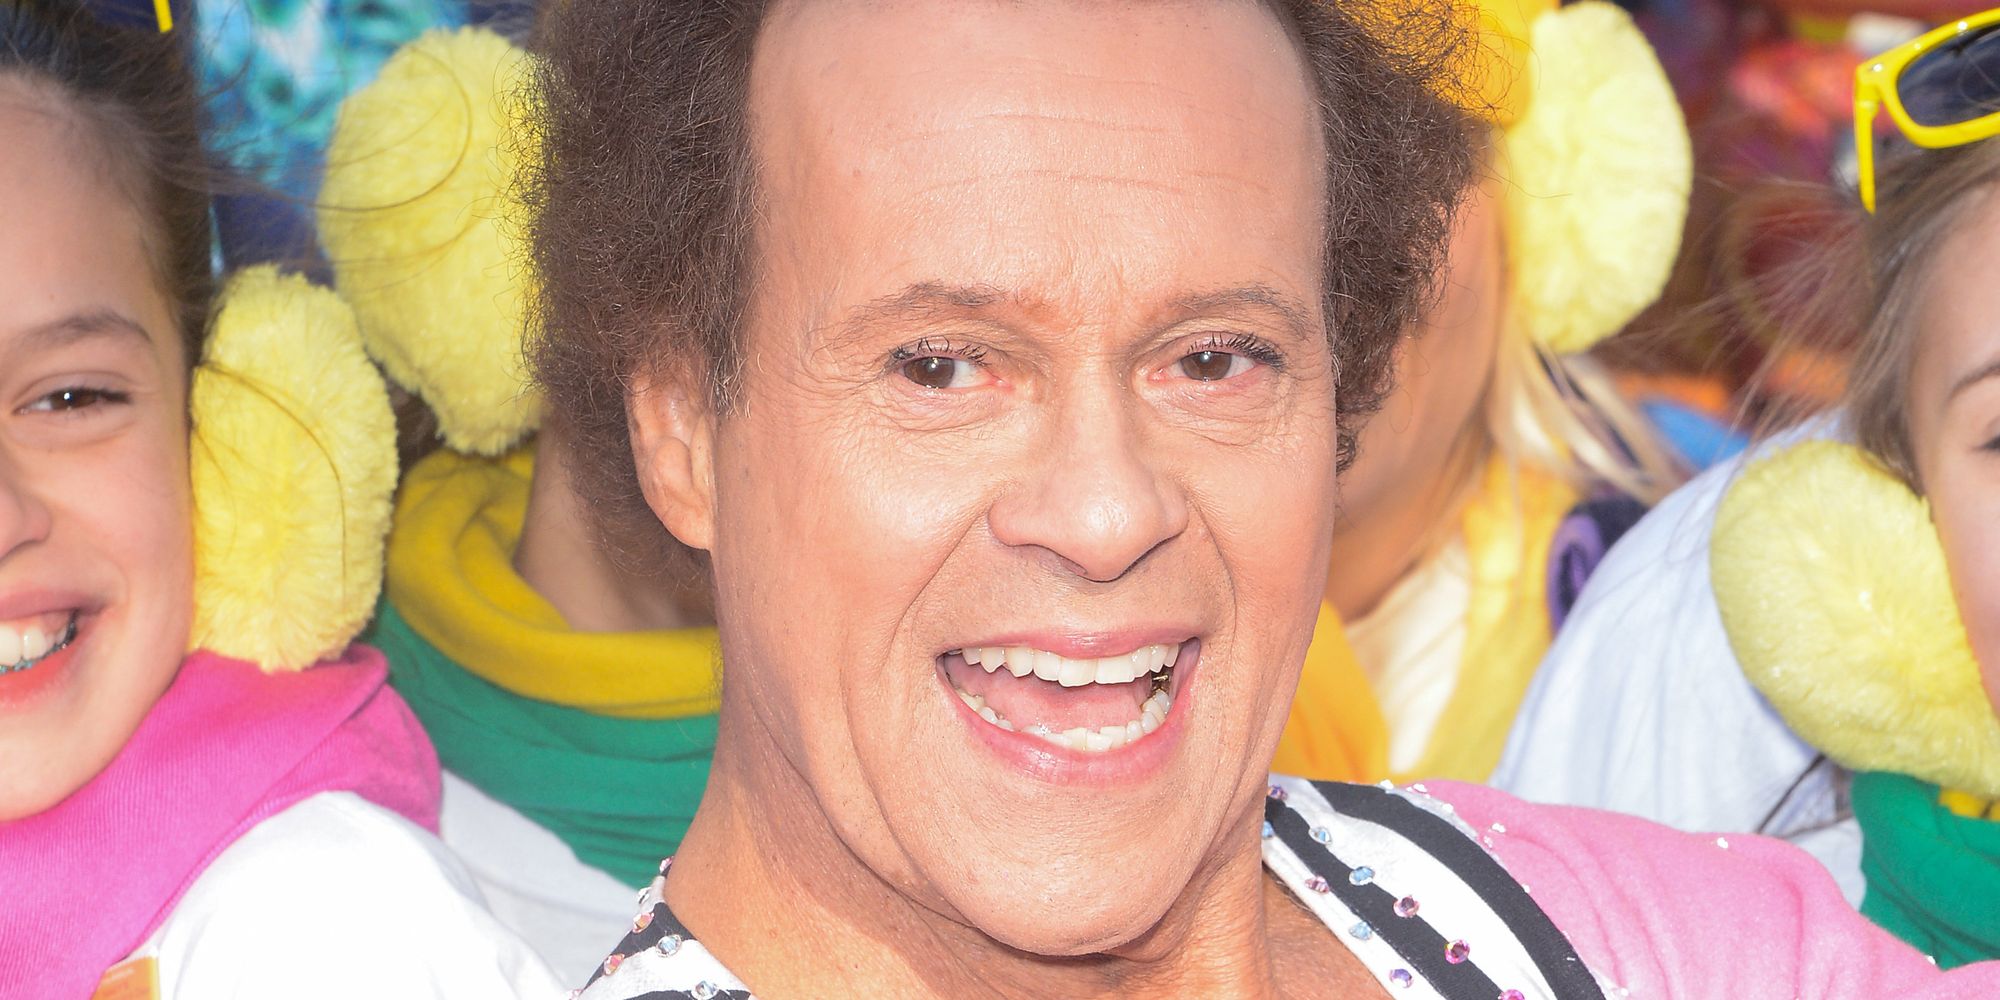 Richard Simmons Addresses Fans For First Time Since Hospitalization - Huffington Post